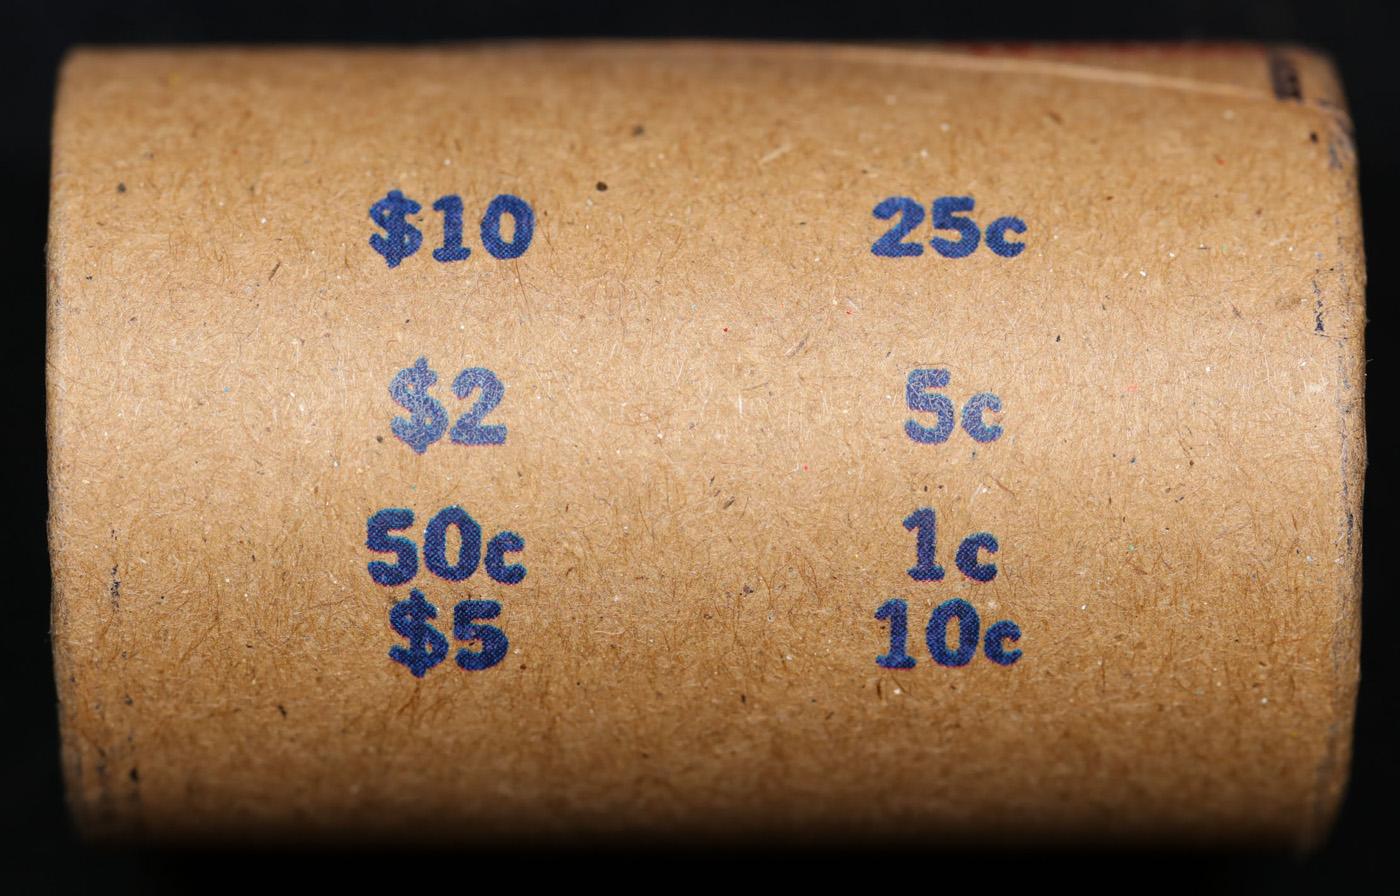 *EXCLUSIVE* Hand Marked " Morgan Standard," x20 coin Covered End Roll! - Huge Vault Hoard  (FC)